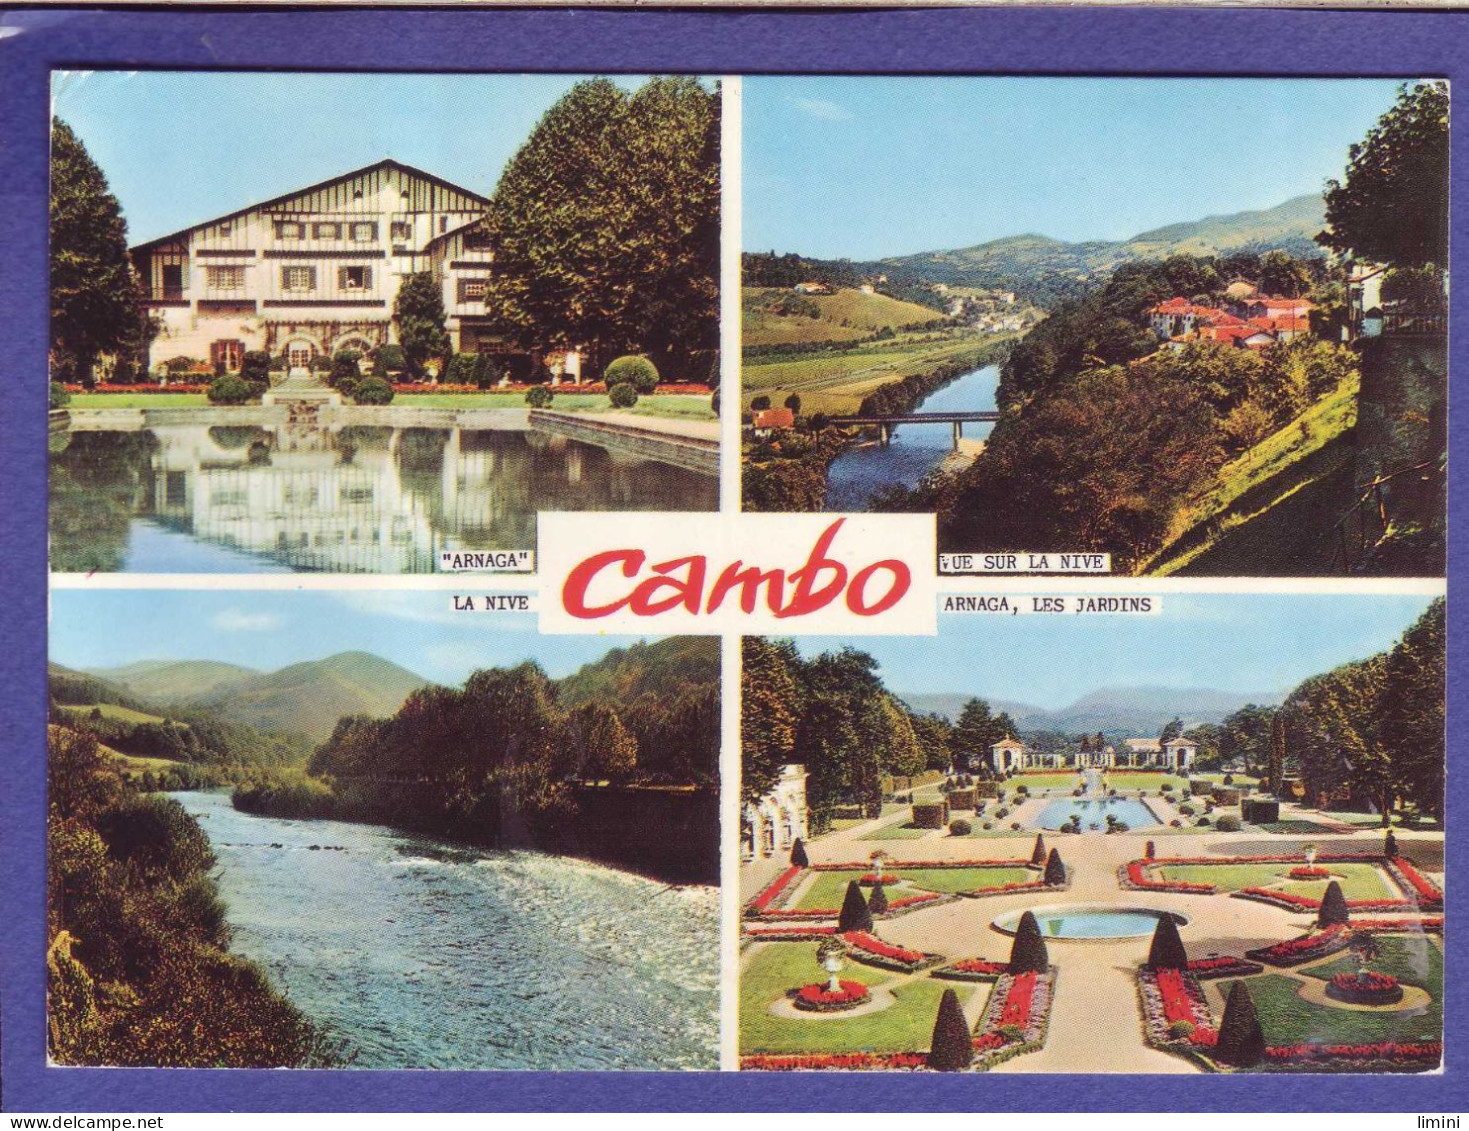 64 - CAMBO - MULTIVUES  - Cambo-les-Bains